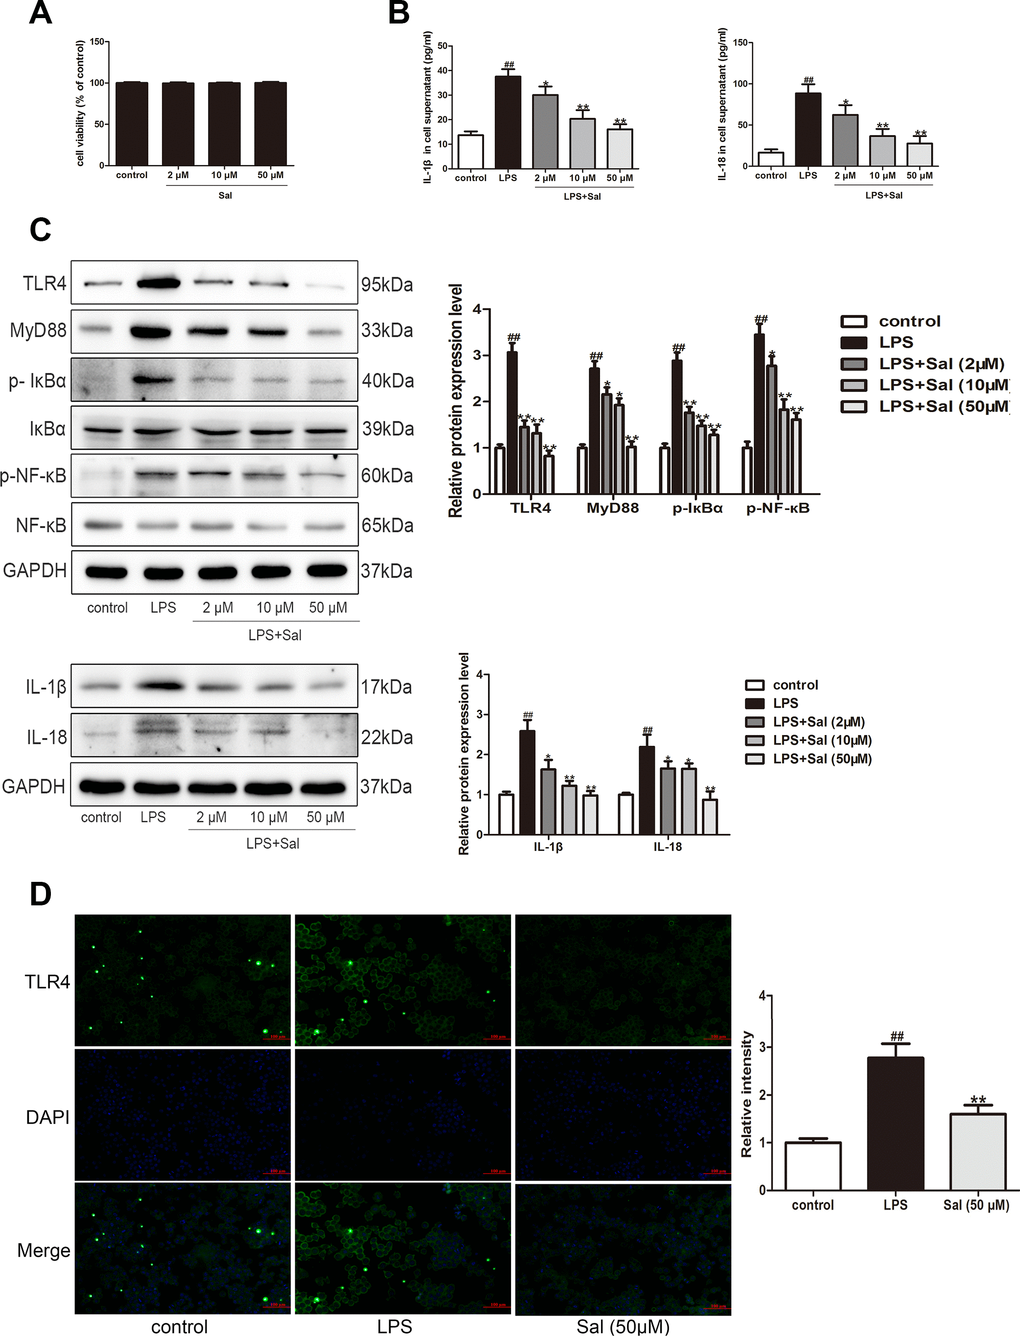 Sal inhibited LPS-induced BV2 cells inflammation response via TLR4/MyD88/ NF-κB signaling pathways. (A) Effect of different doses of Sal on BV2 cell viability. BV2 cells (1 x 104 cells/well) were exposed to different concentrations of Sal (2, 10, 50 μM) for 24 h. The cell viability of BV2 was measured by CCK8 assay. (B) The levels of IL-1β and IL-18 in the supernatant of BV2 cells were determined by ELISA kits (n = 6). BV2 cell were treated with Sal (2, 10, 50 μM) for 2 h, followed by stimulation with LPS (100 ng/ml) for 24 h. (C) Western blotting was performed to determine the expressions of TLR4, MyD88, p-IкBα, p-NF-кB in LPS-induced BV2 cells. The cells were incubated with Sal (2, 10, 50 μM) for 2 h, followed by stimulation with LPS (100 ng/ml) for 30 min. Western blotting was performed to determine the expression of IL-1β and IL-18 in LPS-induced BV2 cells. The cells were incubated with Sal (2, 10, 50 μM) for 2 h, followed by stimulation with LPS (100 ng/ml) for 24 h. (D) Immunofluorescence staining of TLR4 in BV2 cells. The cells were incubated with Sal (50 μM) for 2 h, followed by stimulation with LPS (100 ng/ml) for 30 min. Original magnification: x200. All data are represented as mean ± SD. # P ## P 